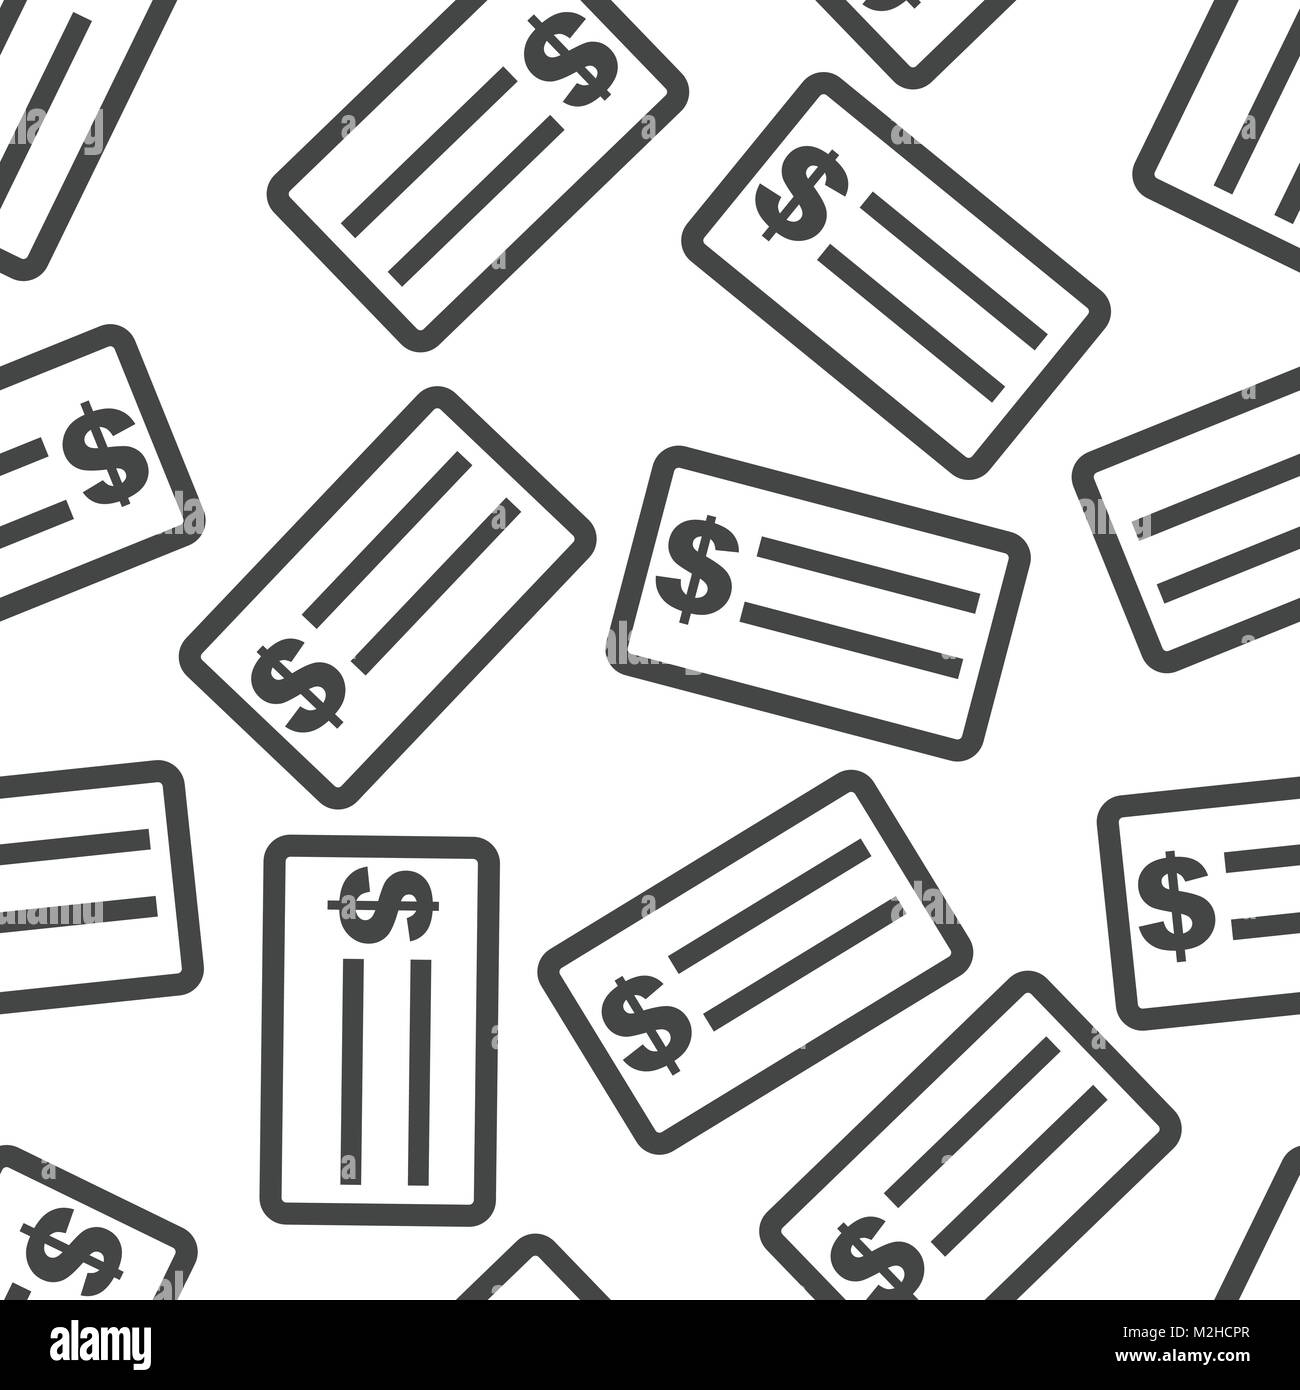 Check money seamless pattern background icon. Flat vector illustration. Check dollar sign symbol pattern. Stock Vector